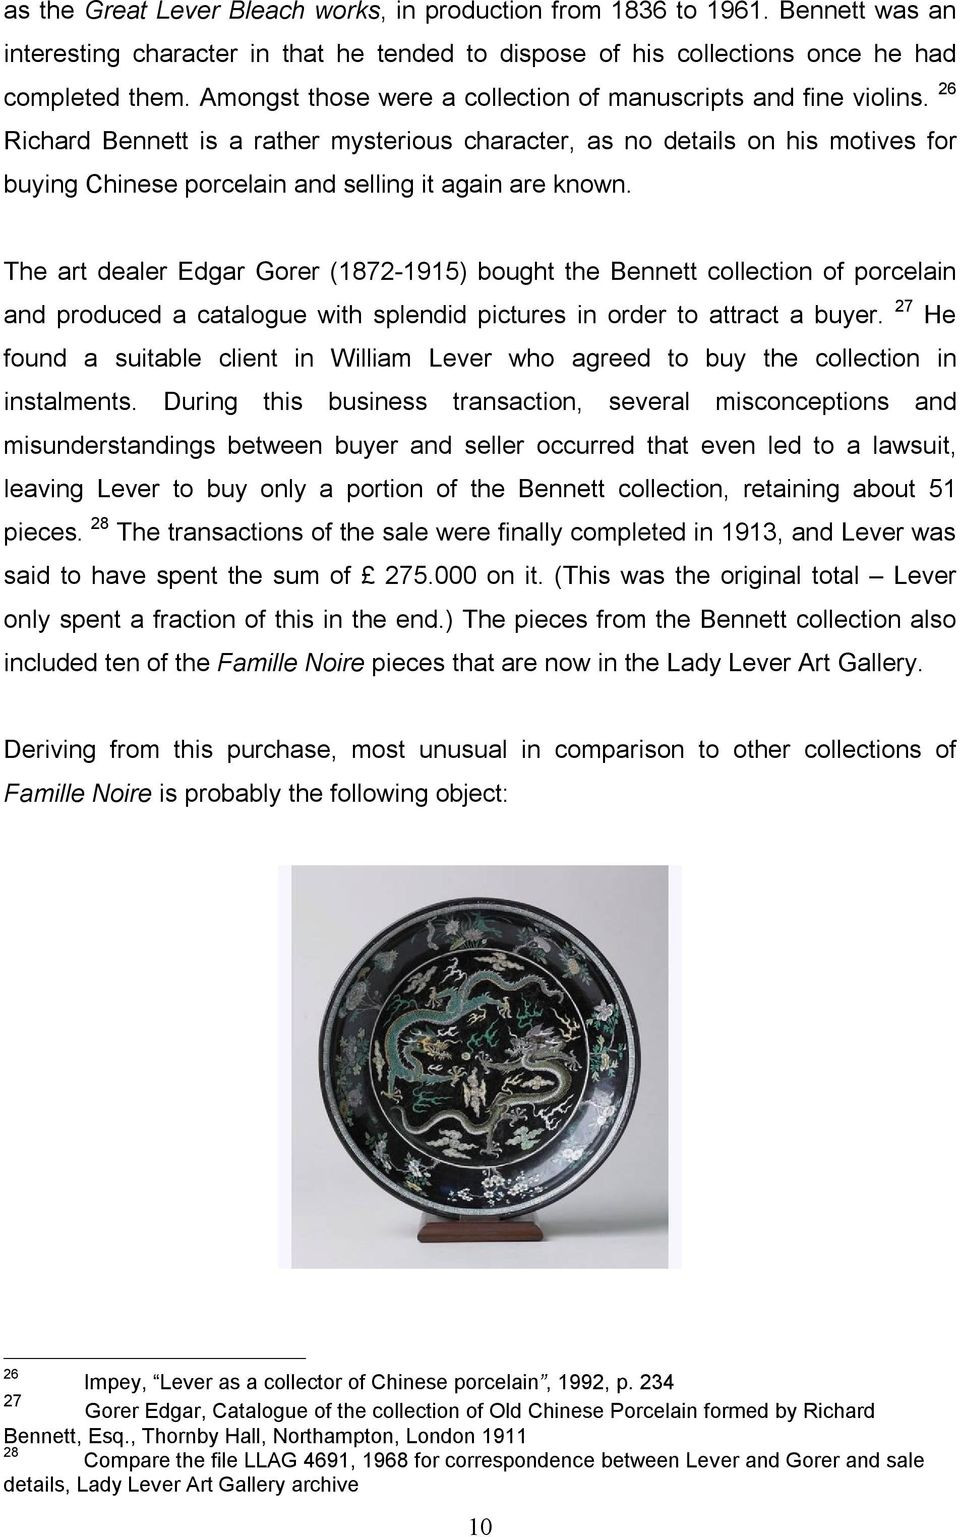 22 Wonderful oriental Vase Markings 2024 free download oriental vase markings of william lever s collecting of famille noire porcelain pdf intended for 26 richard bennett is a rather mysterious character as no details on his motives for